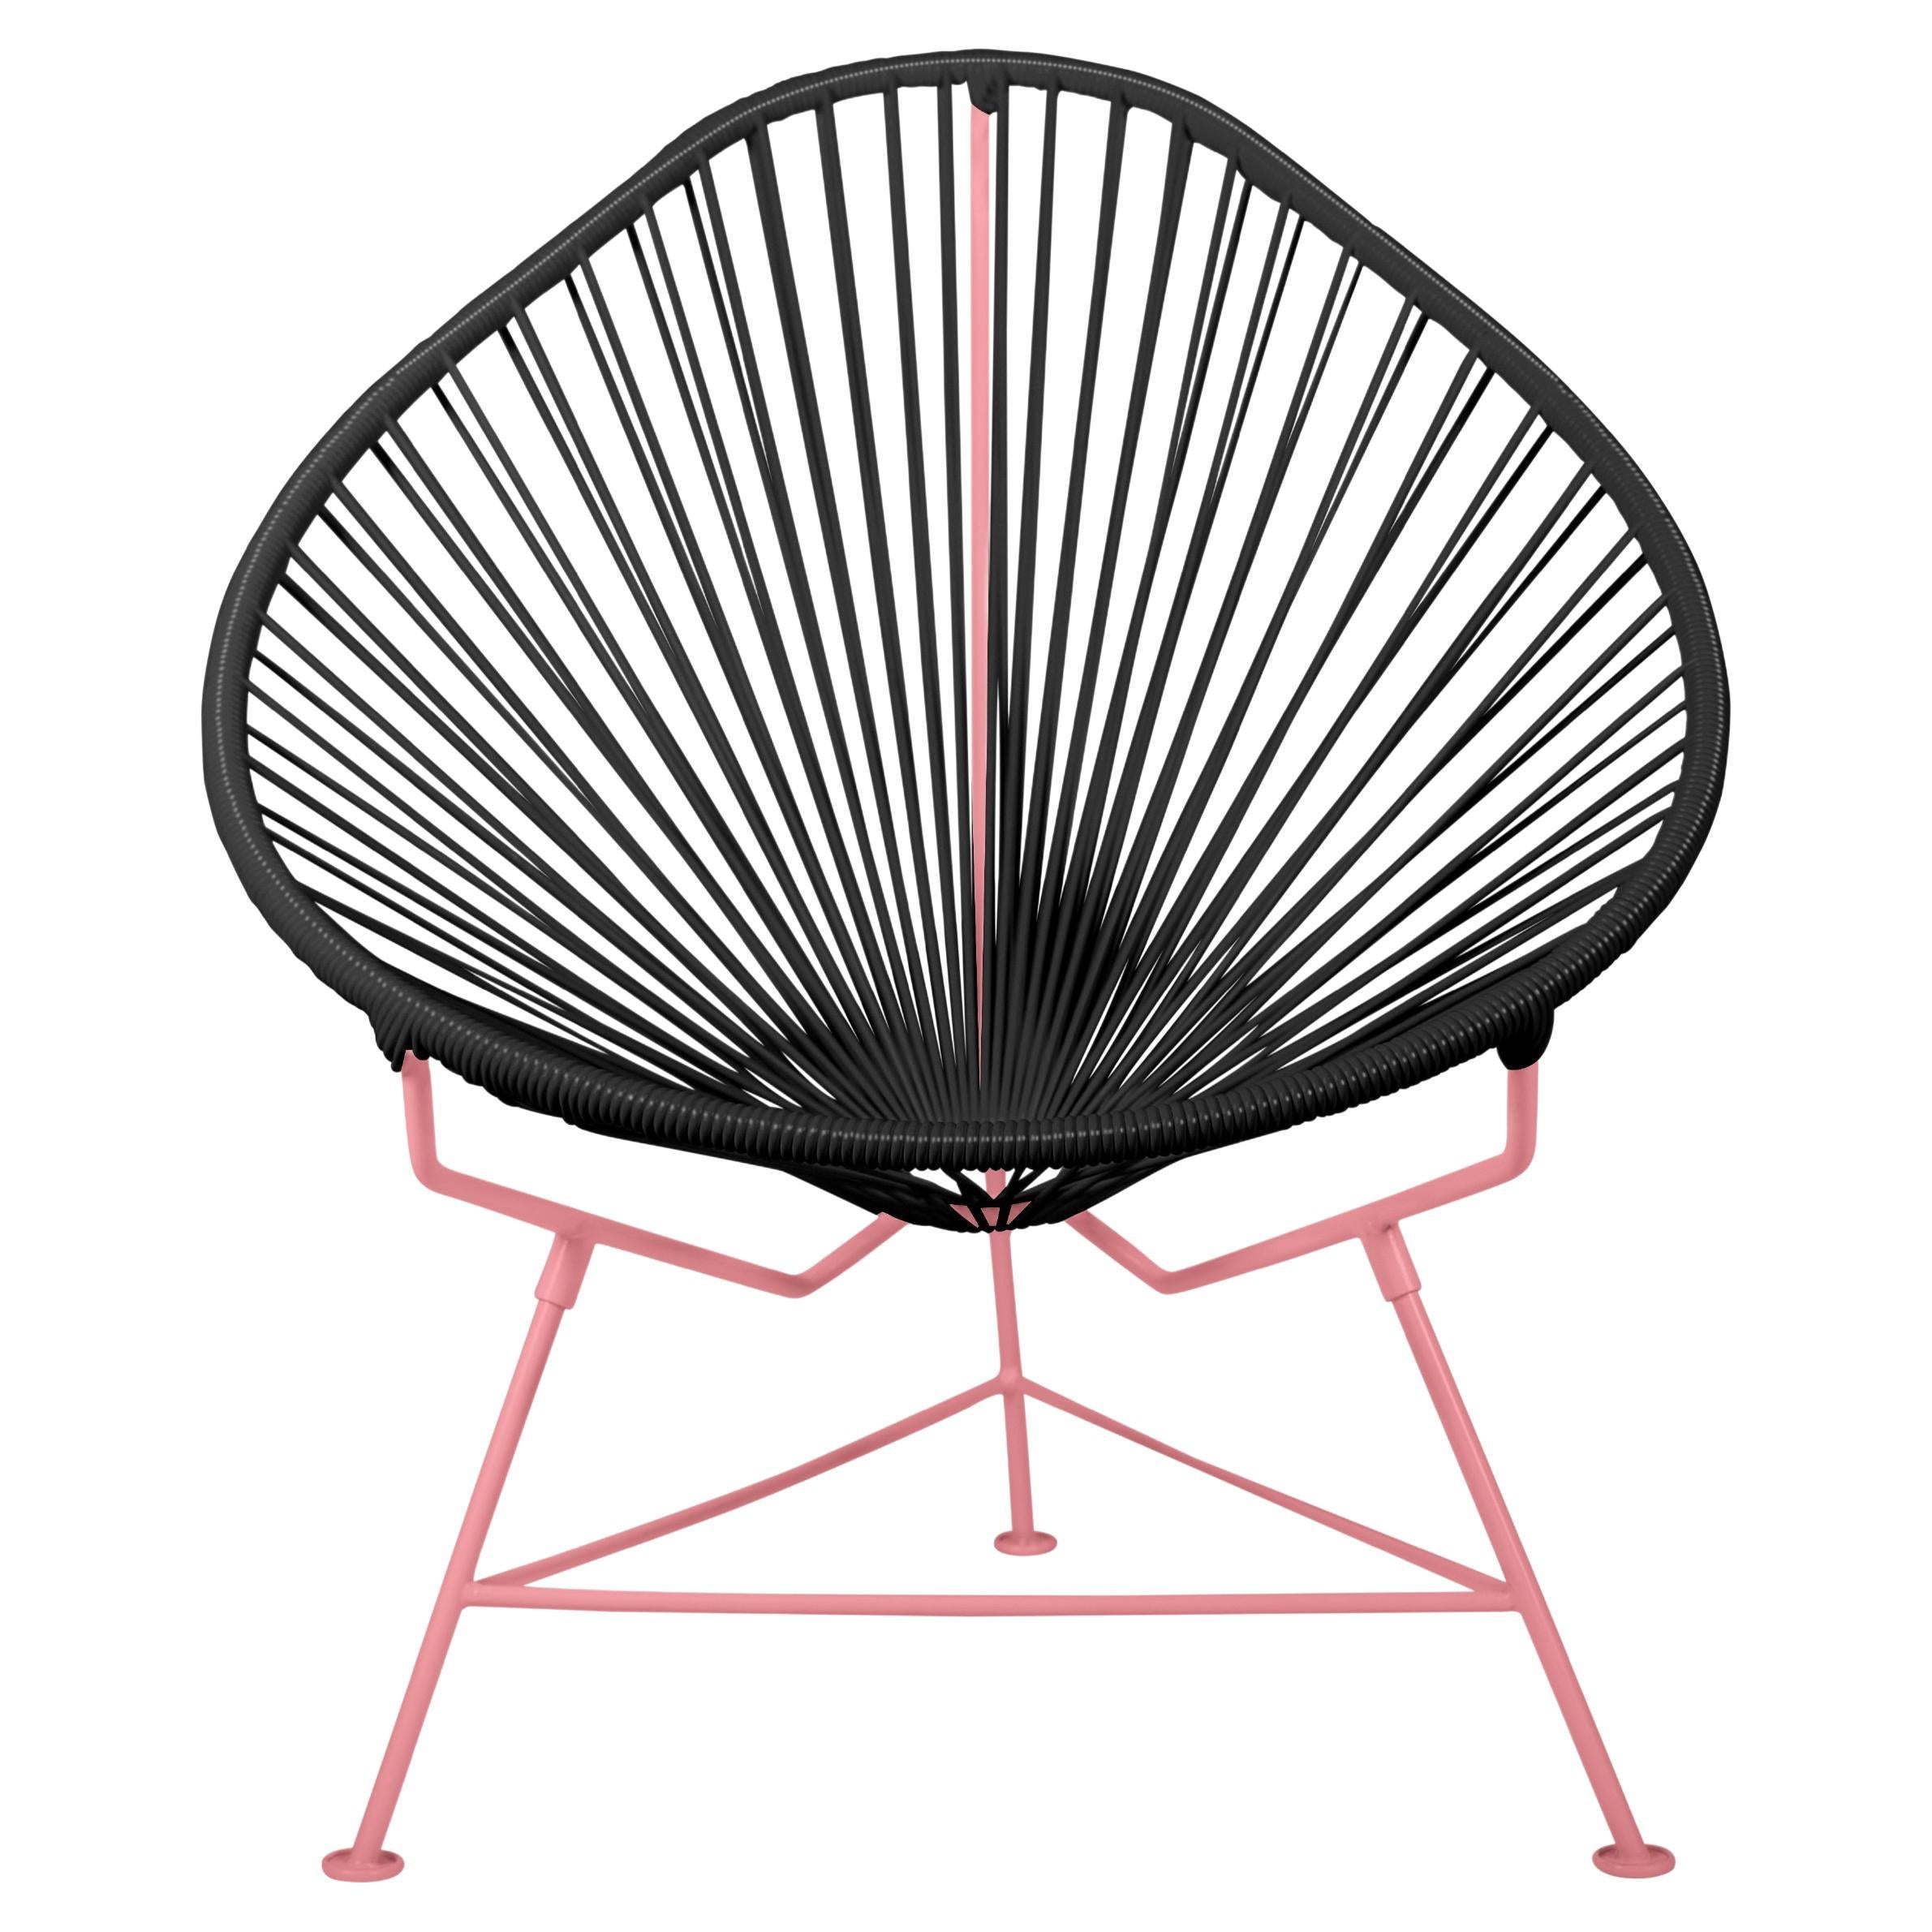 Innit Designs Acapulco Chair Black Weave on Coral Frame